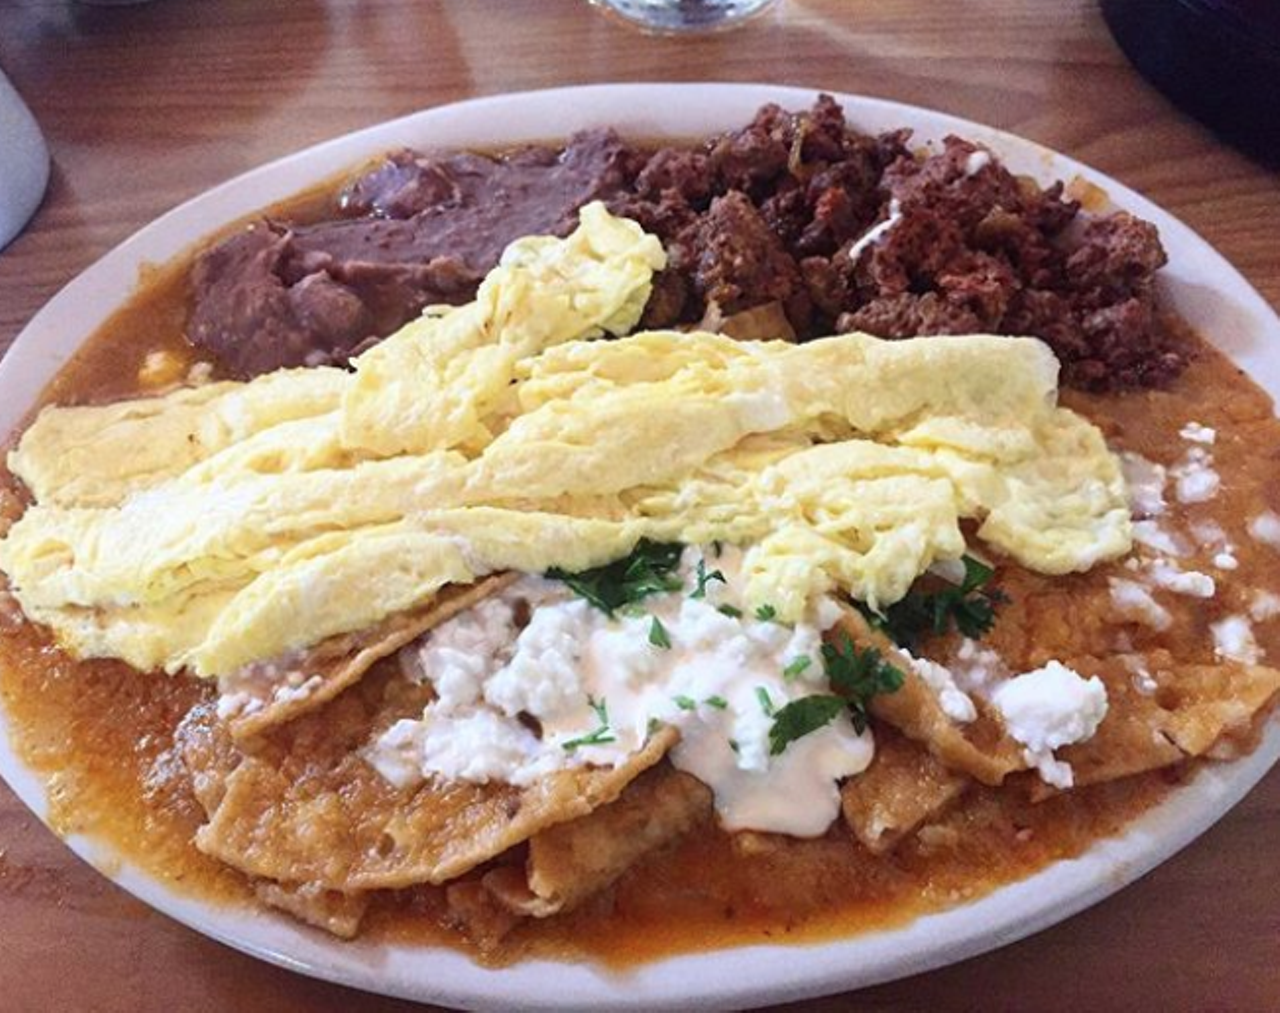 Panchos and Gringos
900 Nolan St., (210) 227-6700
Enjoy the “Panchos” side of this restaurant with all-day Mexican hot chocolate, breakfast tacos and huevos rancheros, divorciados, or a la Mexicana.
Photo via Instagram / southtexasfoodie